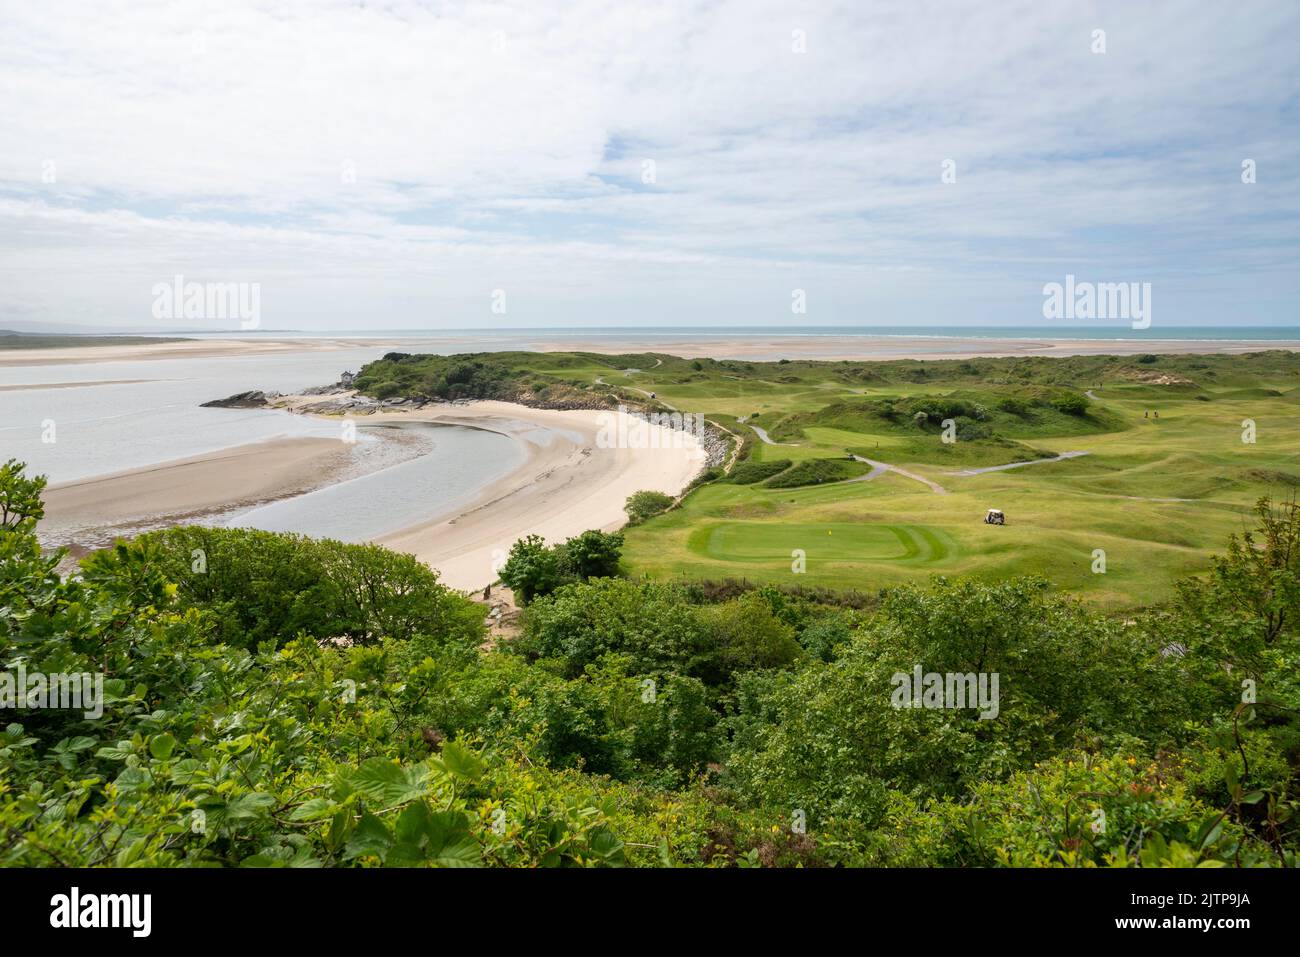 The beach and golf course at Ynys Cyngar near Morfa Bychan on the coast of North Wales. View looking out to Tremadog Bay. Stock Photo